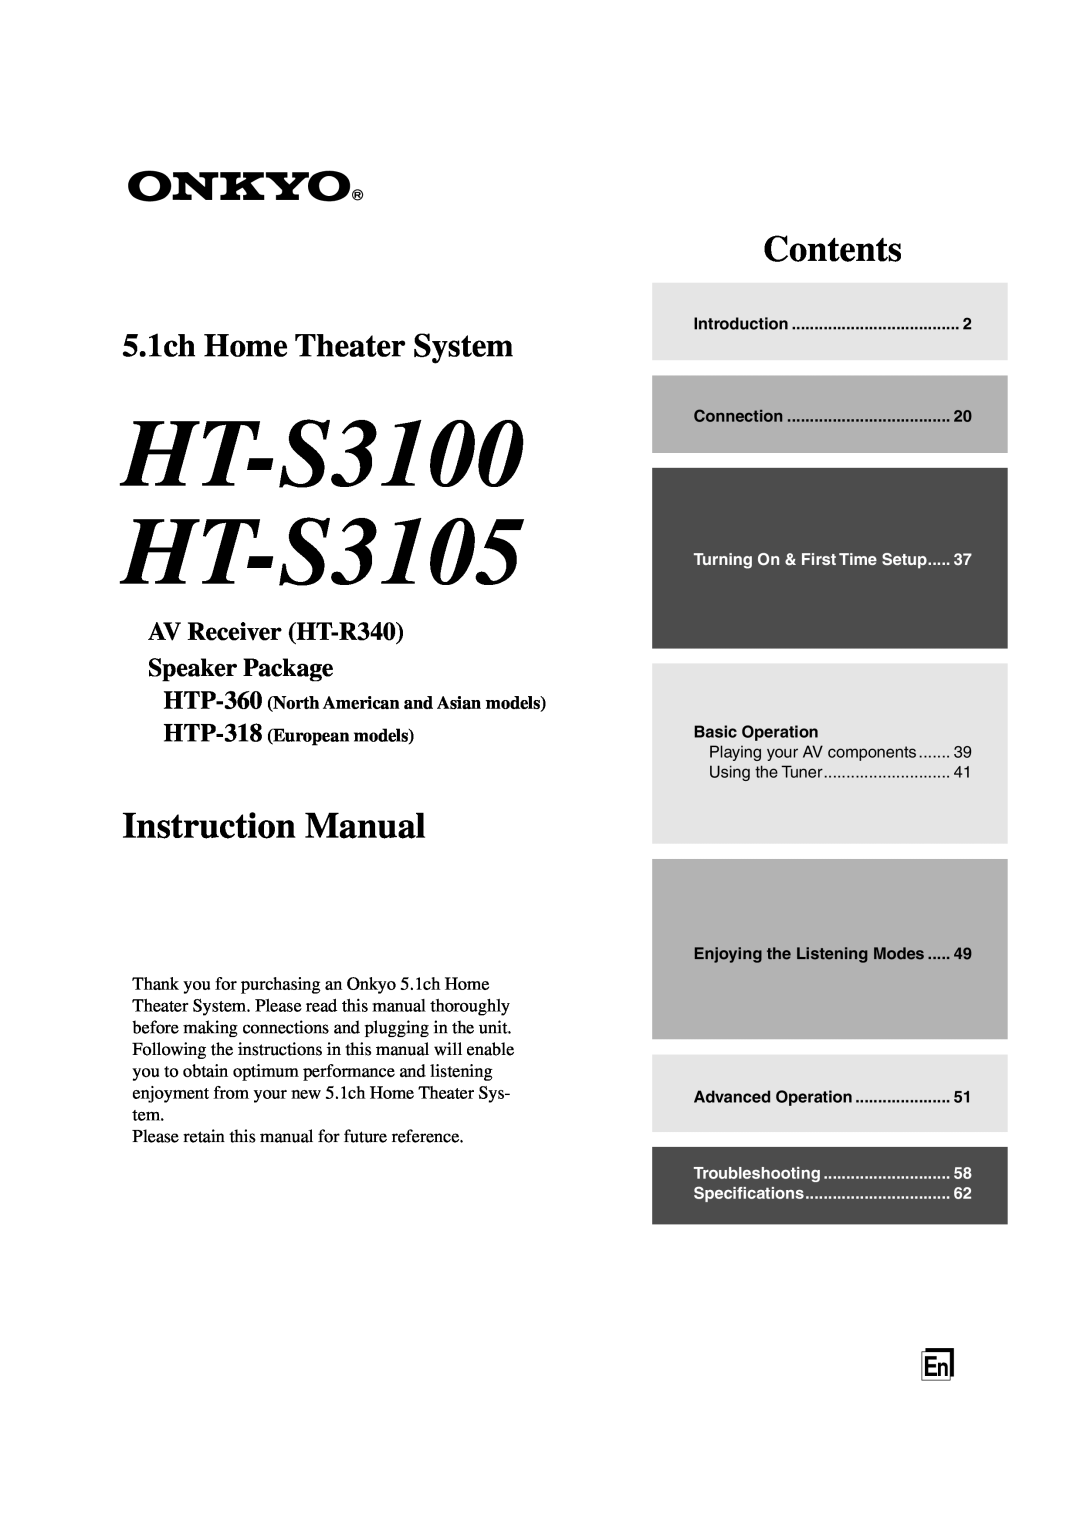 Onkyo instruction manual HT-S3100 HT-S3105, Contents, 5.1ch Home Theater System, AV Receiver HT-R340 Speaker Package 